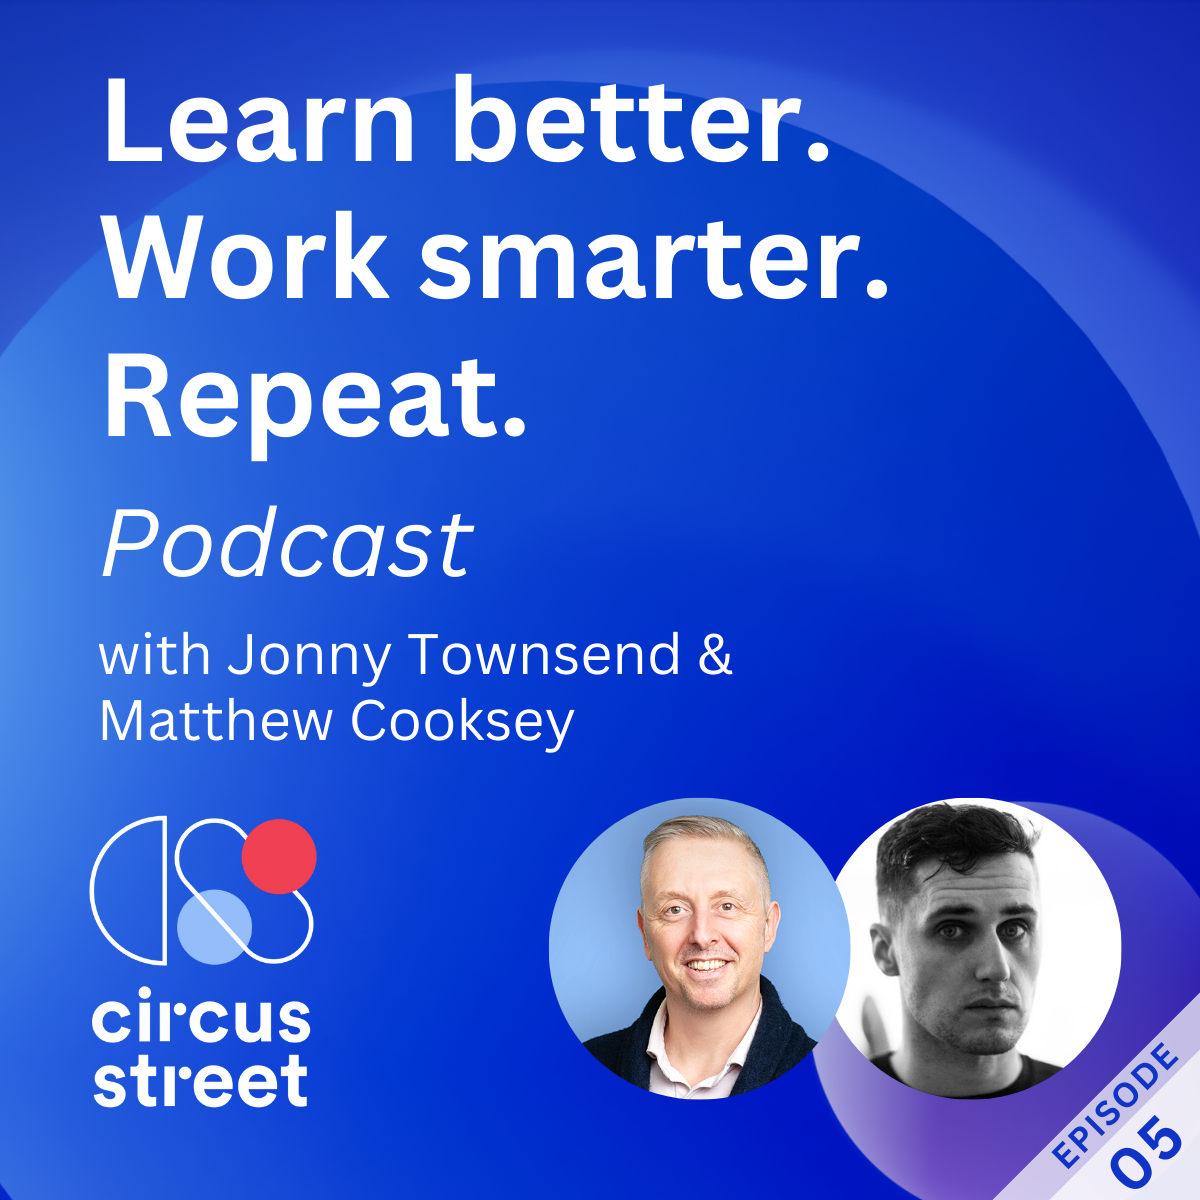 Content Innovation in the Digital Age with Matthew Cooksey